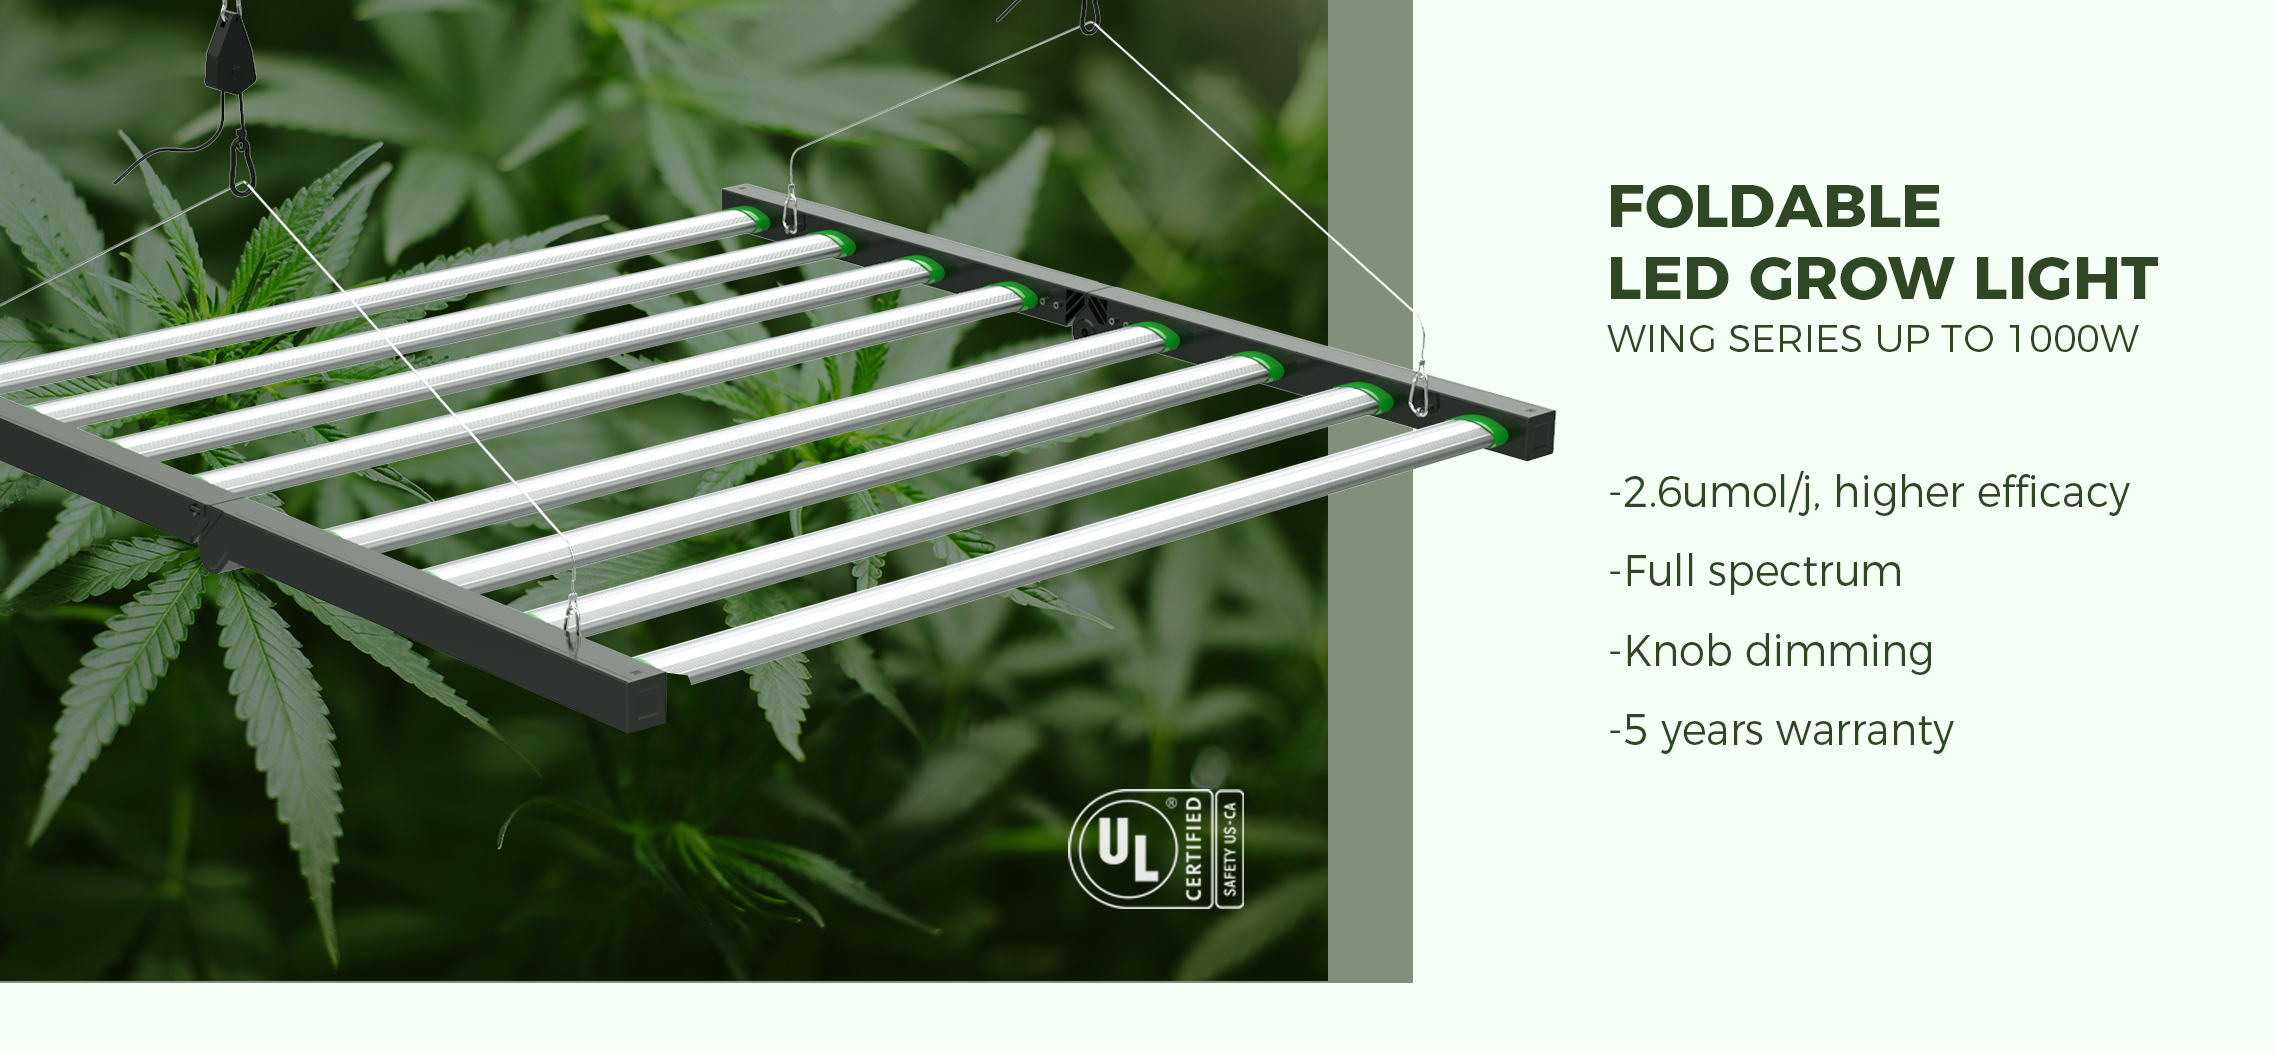 Why LED grow lights are the most suitable for plant growth?